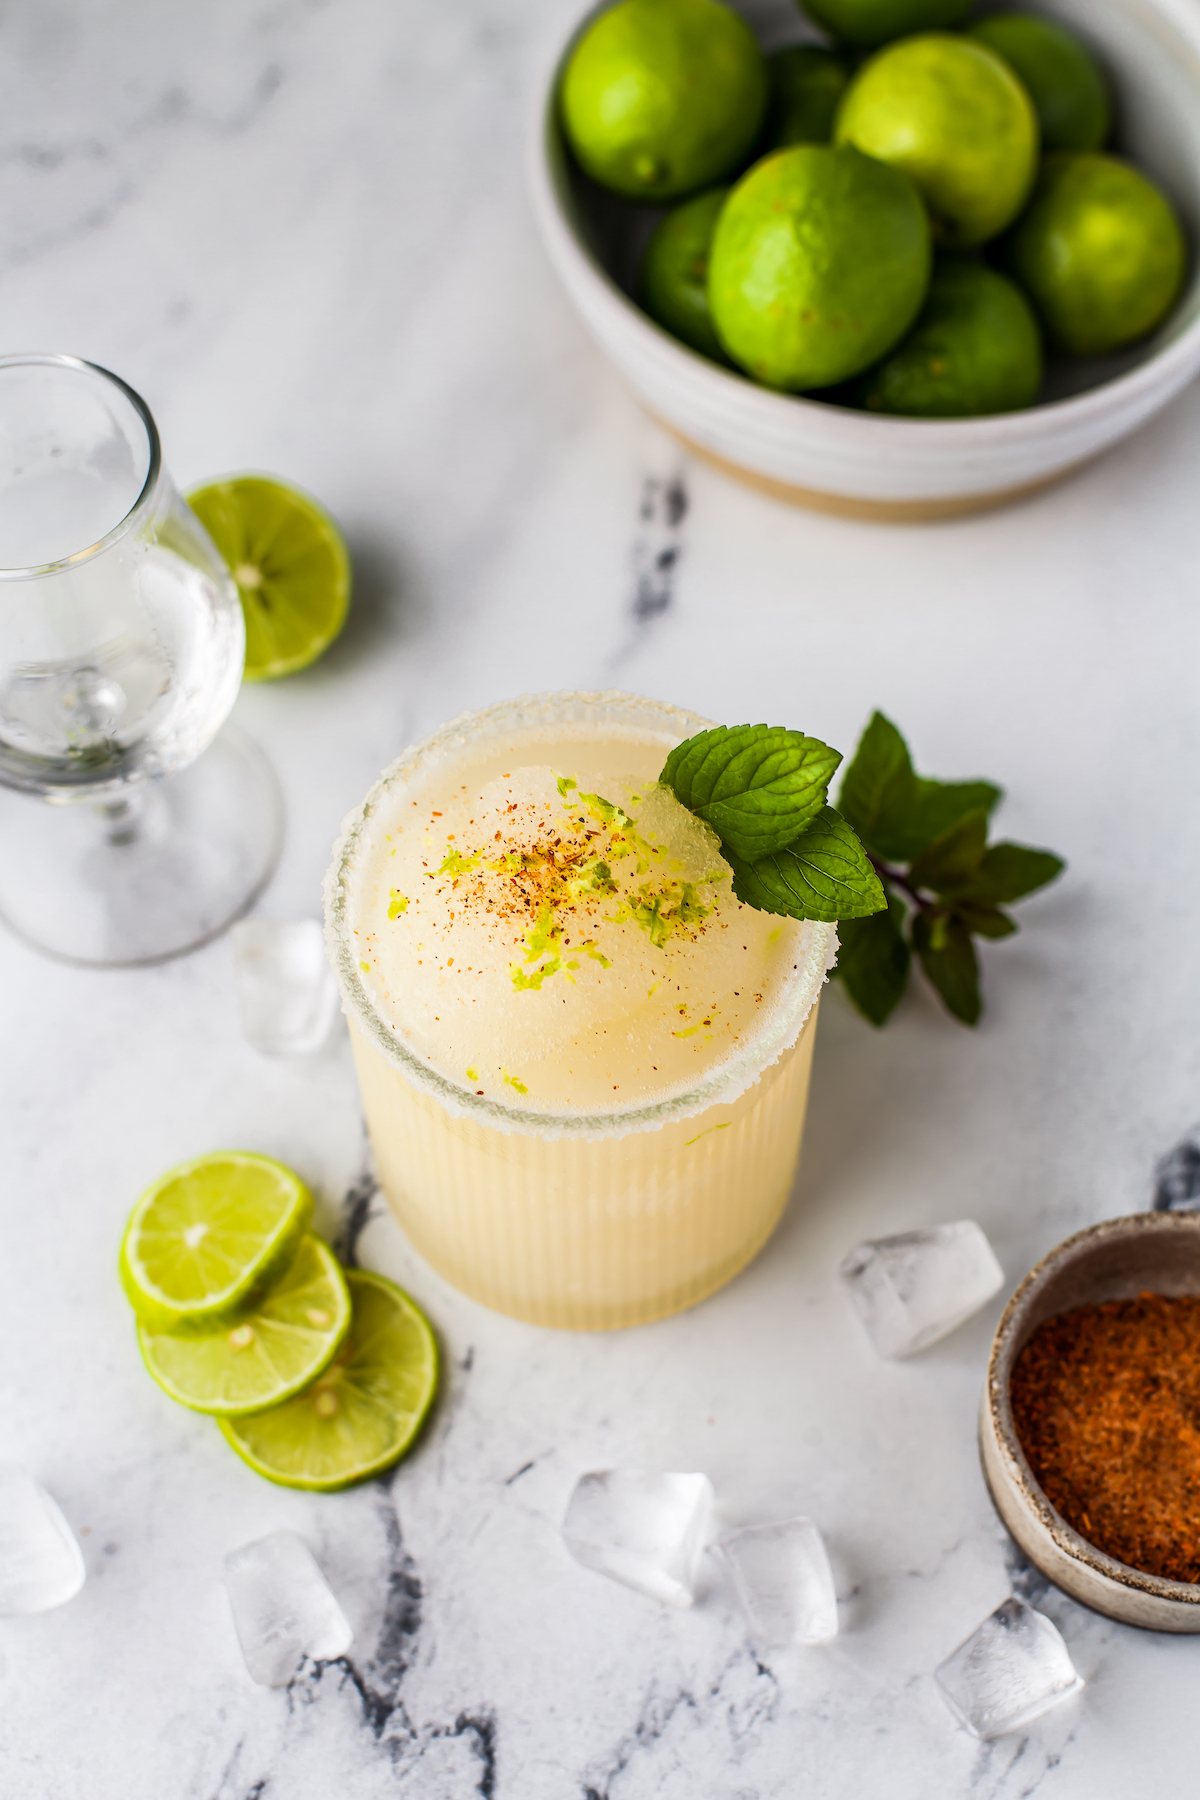 a frozen margarita in a glass with mint and chili spice garnish on a table with lime slices, ice cubes, and a small bowl of seasonings